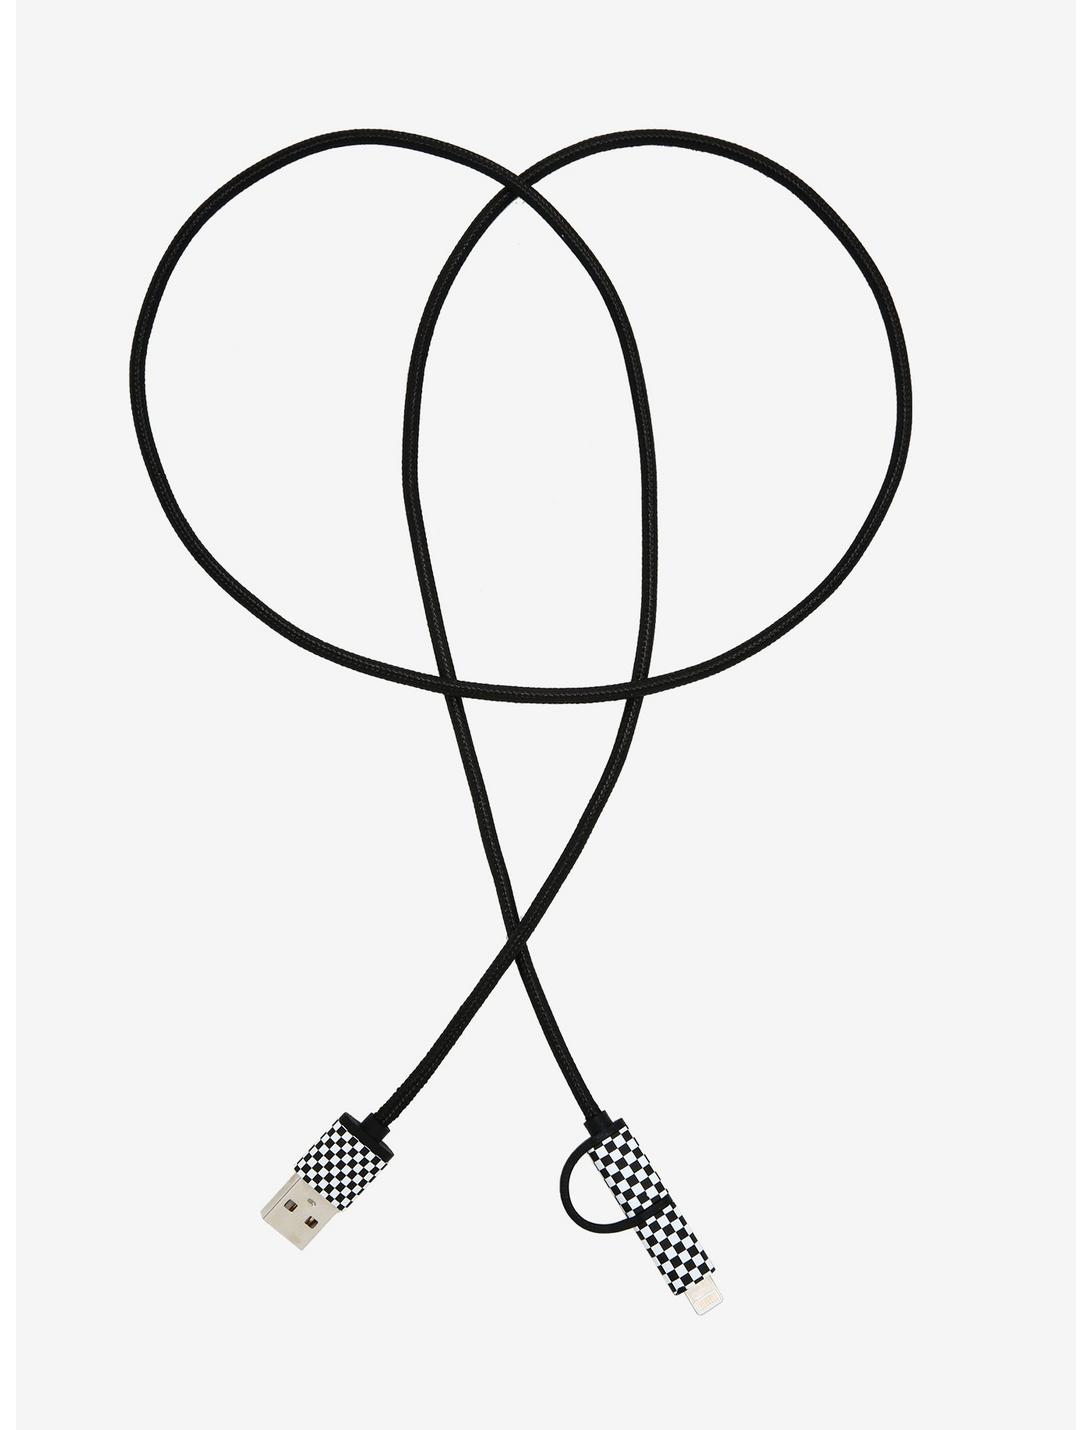 2-In-1 Black 7 White Checkered Charging Cable, , hi-res